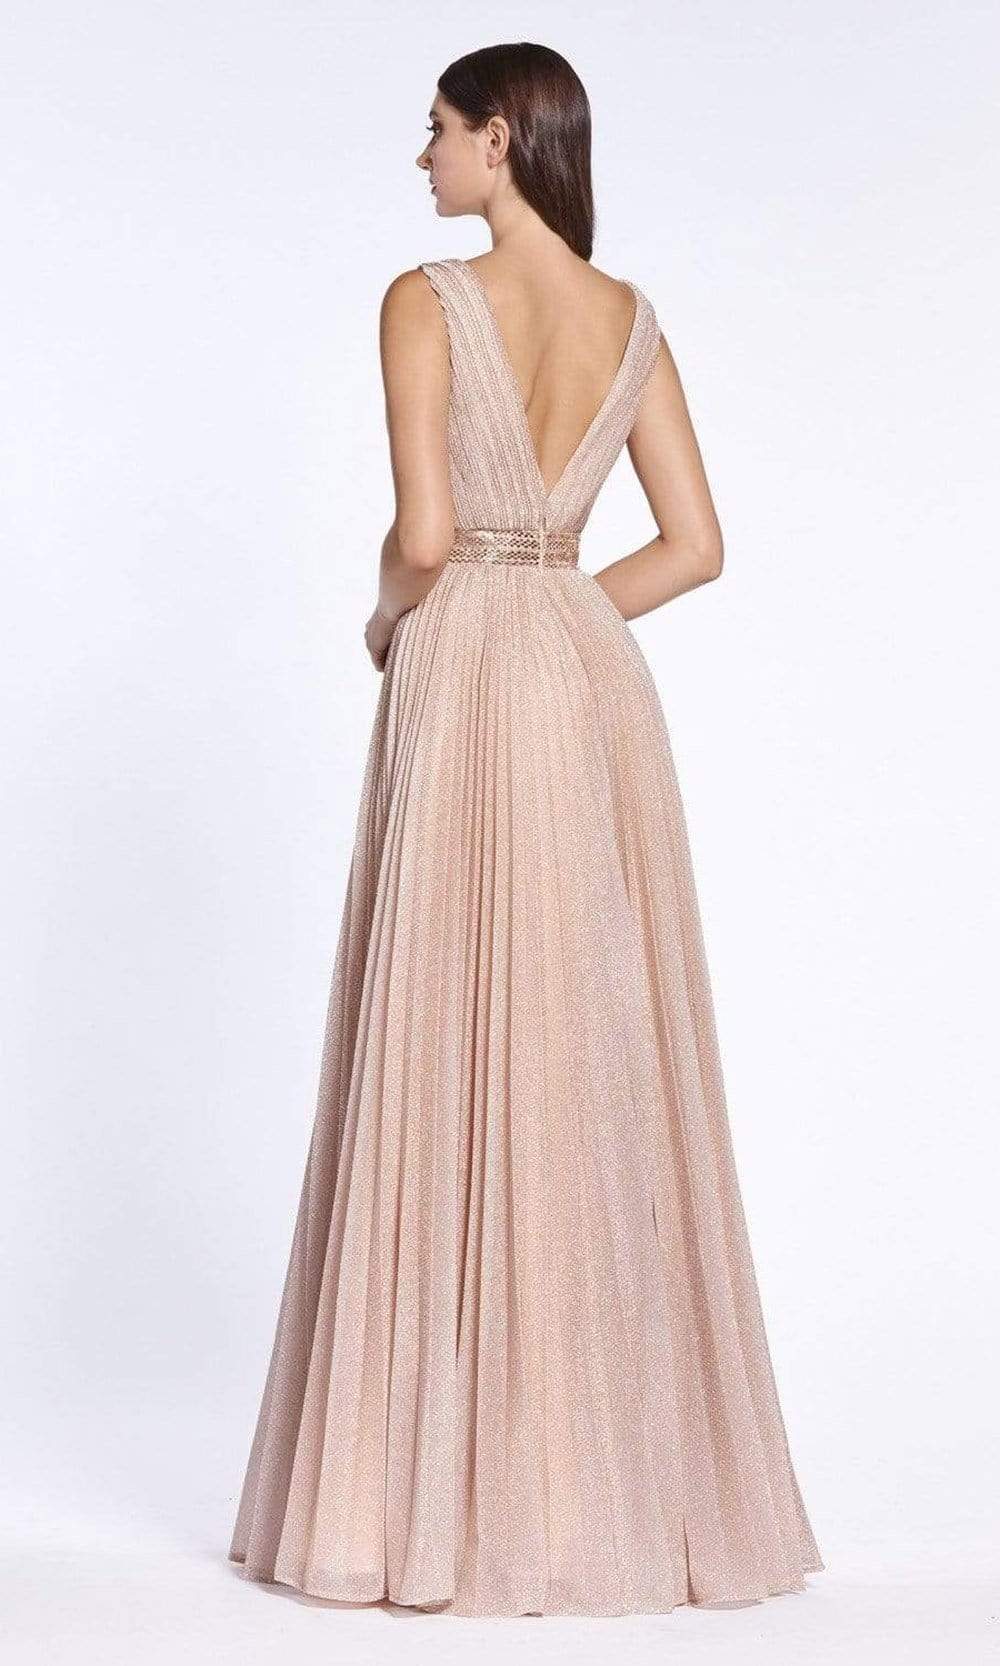 Cinderella Divine - V-Neck and Back Pleated Metallic Finish A-line Gown CM9086SC In Pink and Neutral